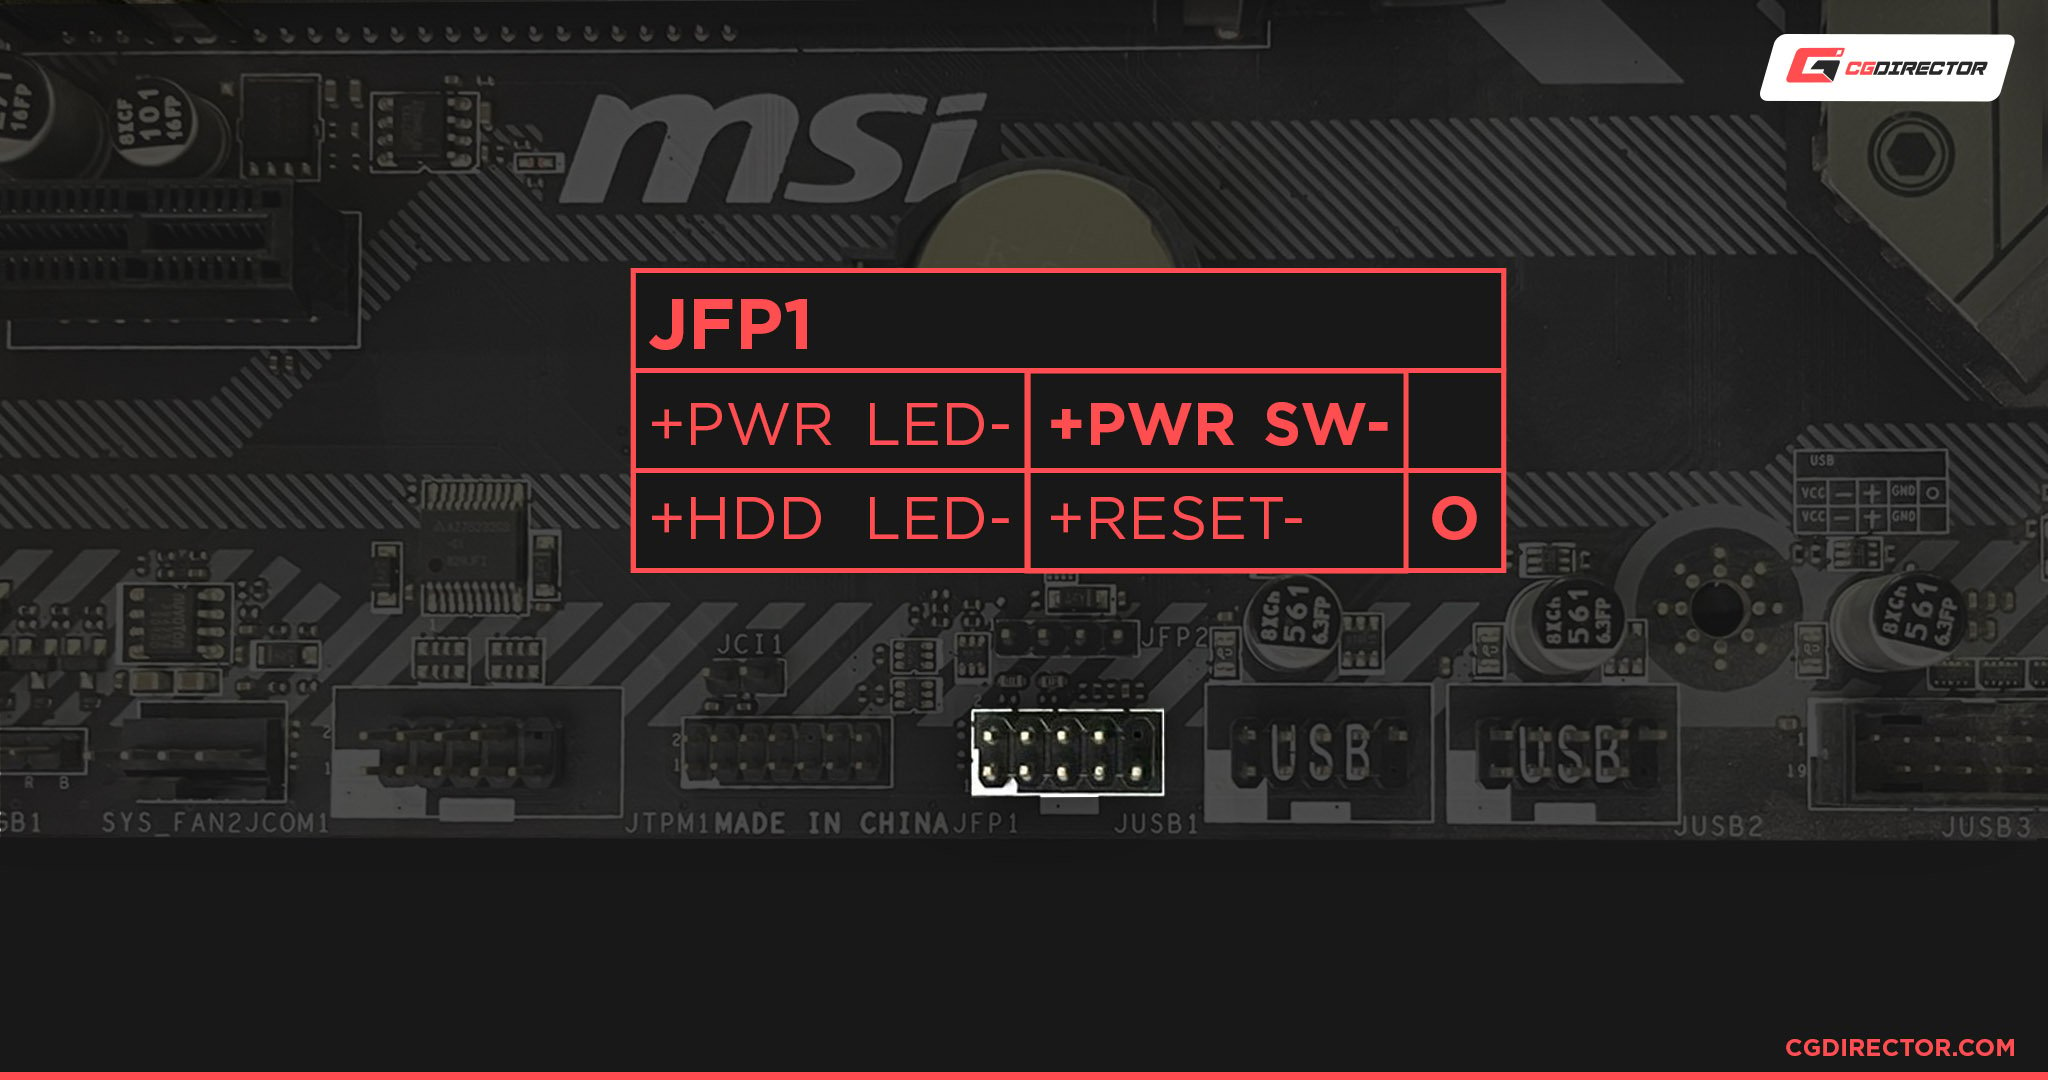 Motherboard PWR SW pins